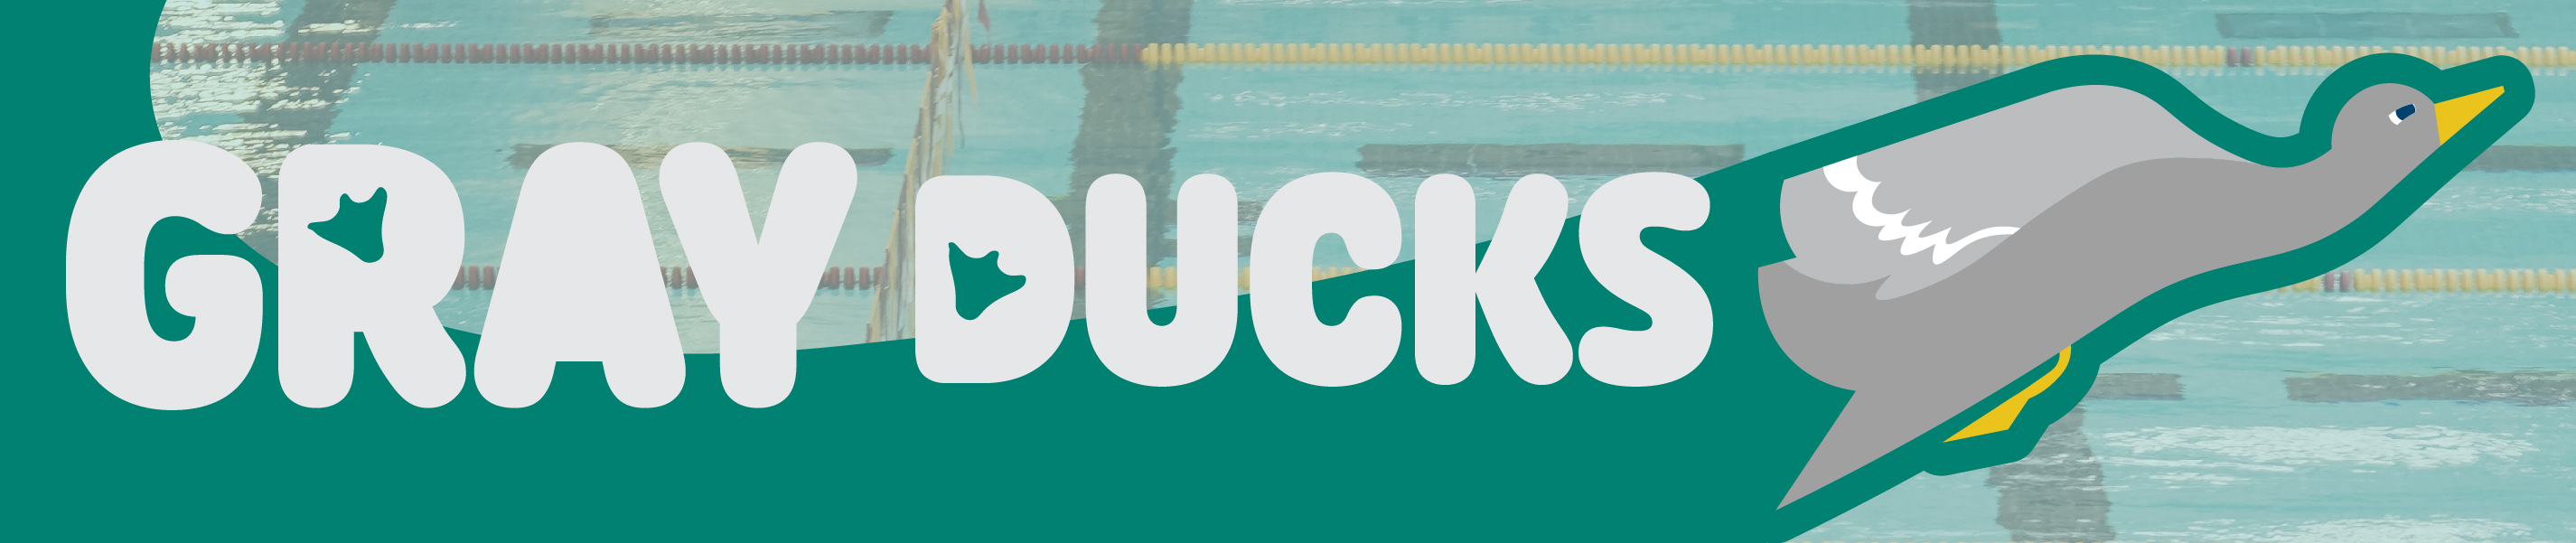 Duck illustration swimming up over picture of pool lanes